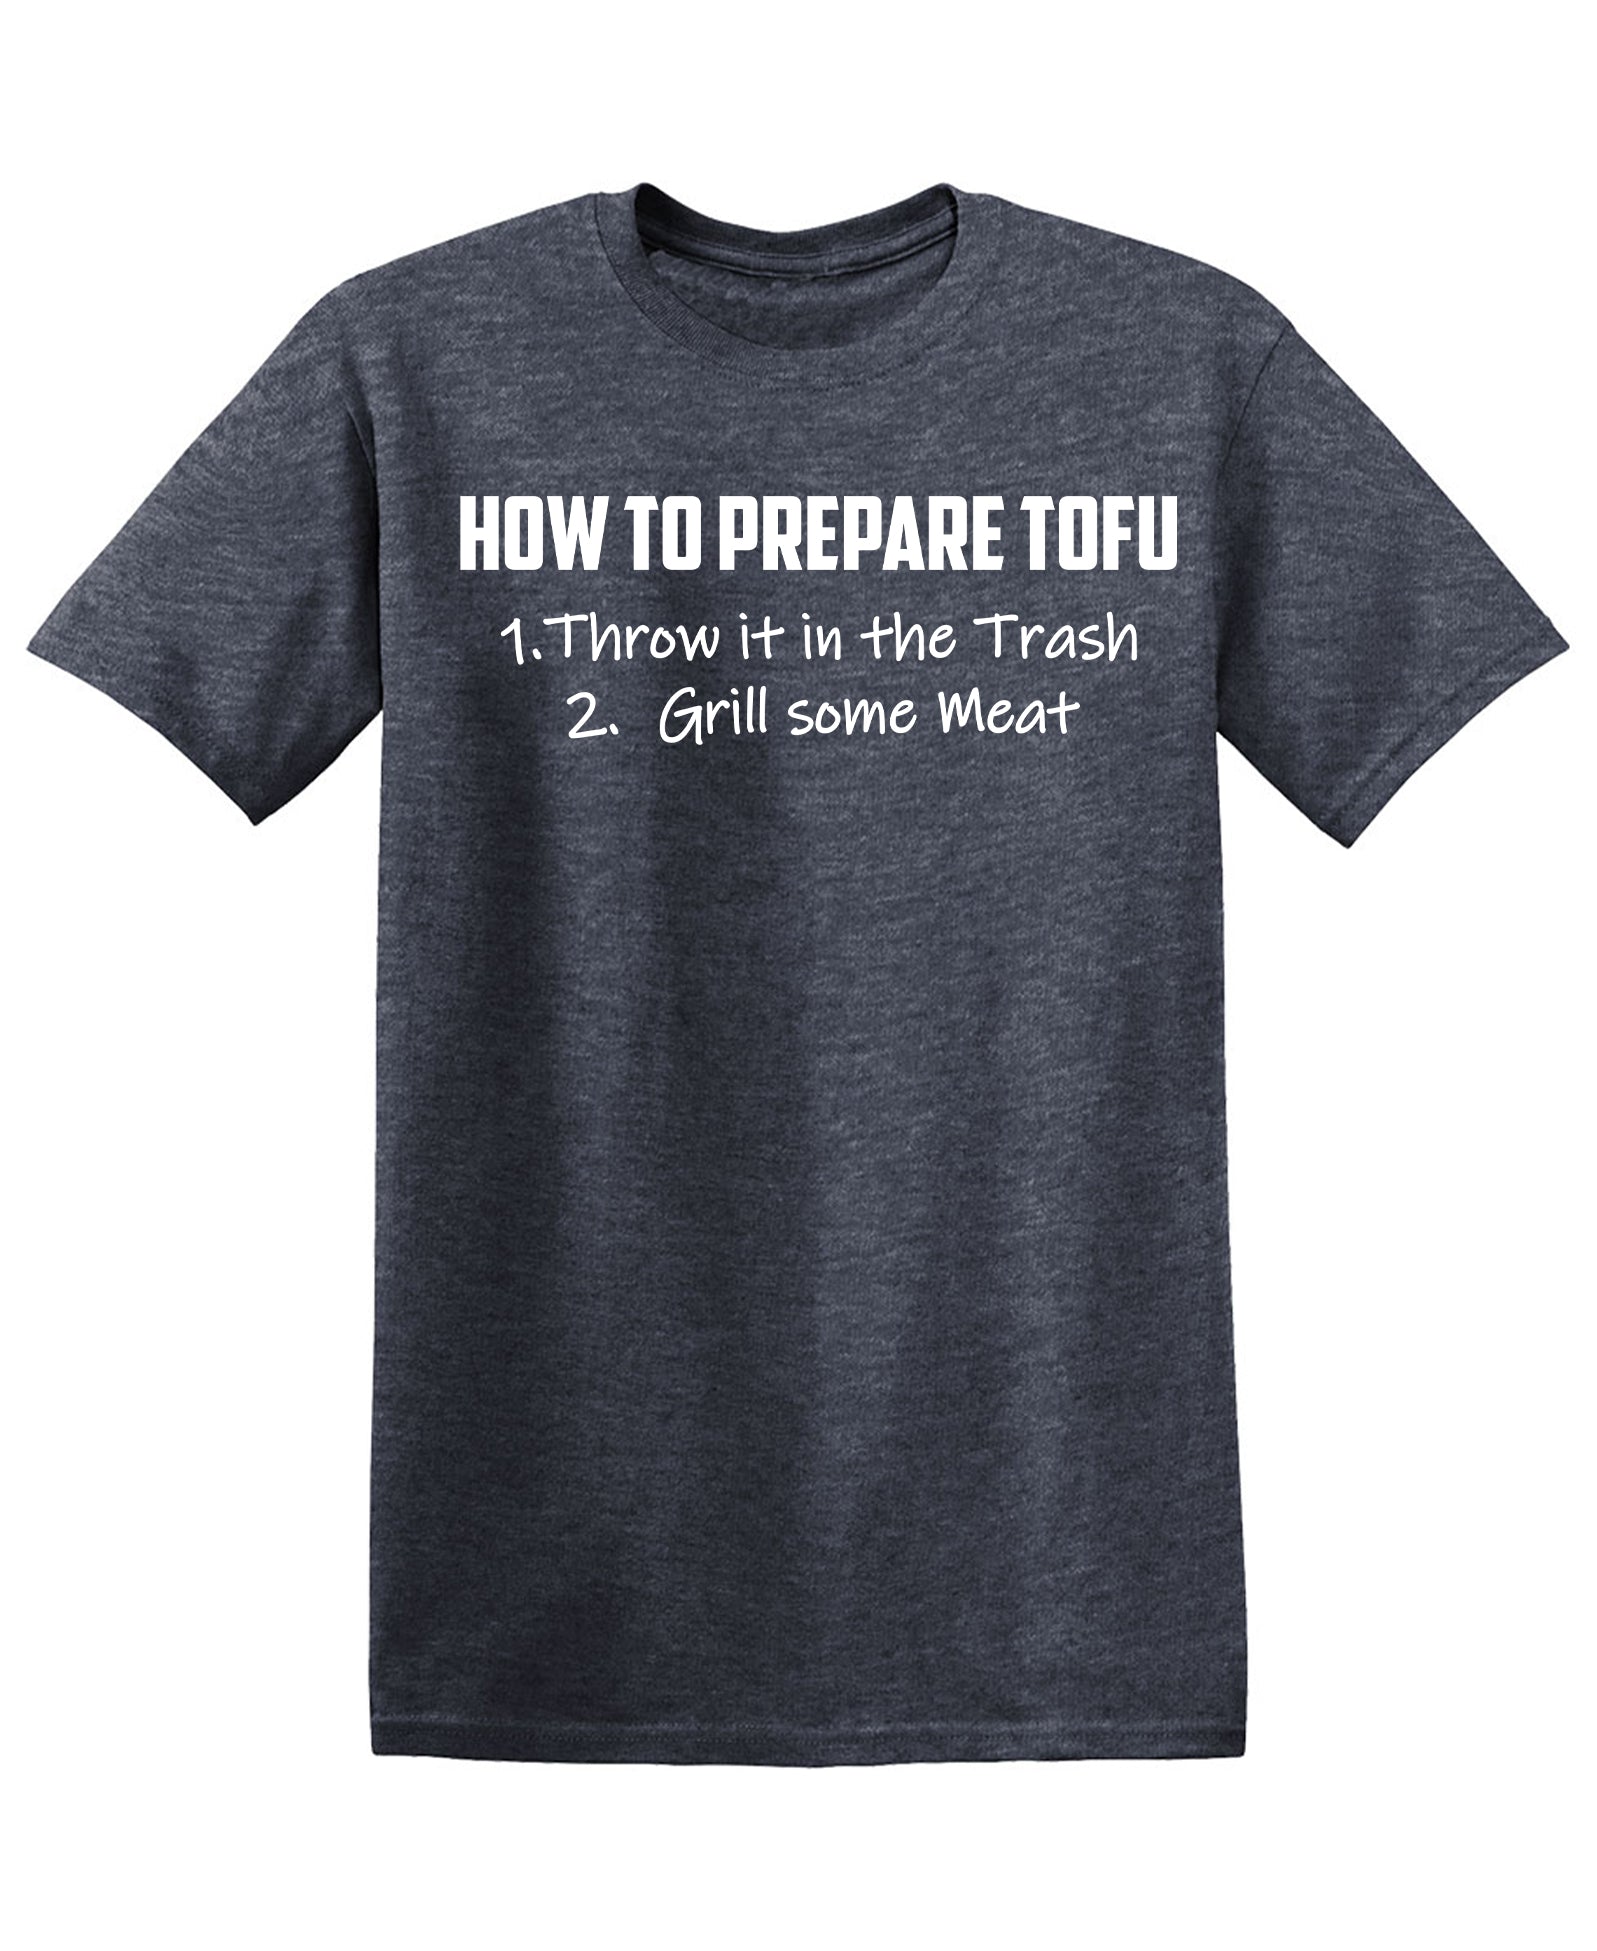 How to Prepare Tofu, Throw it in the Trash Funny Tee